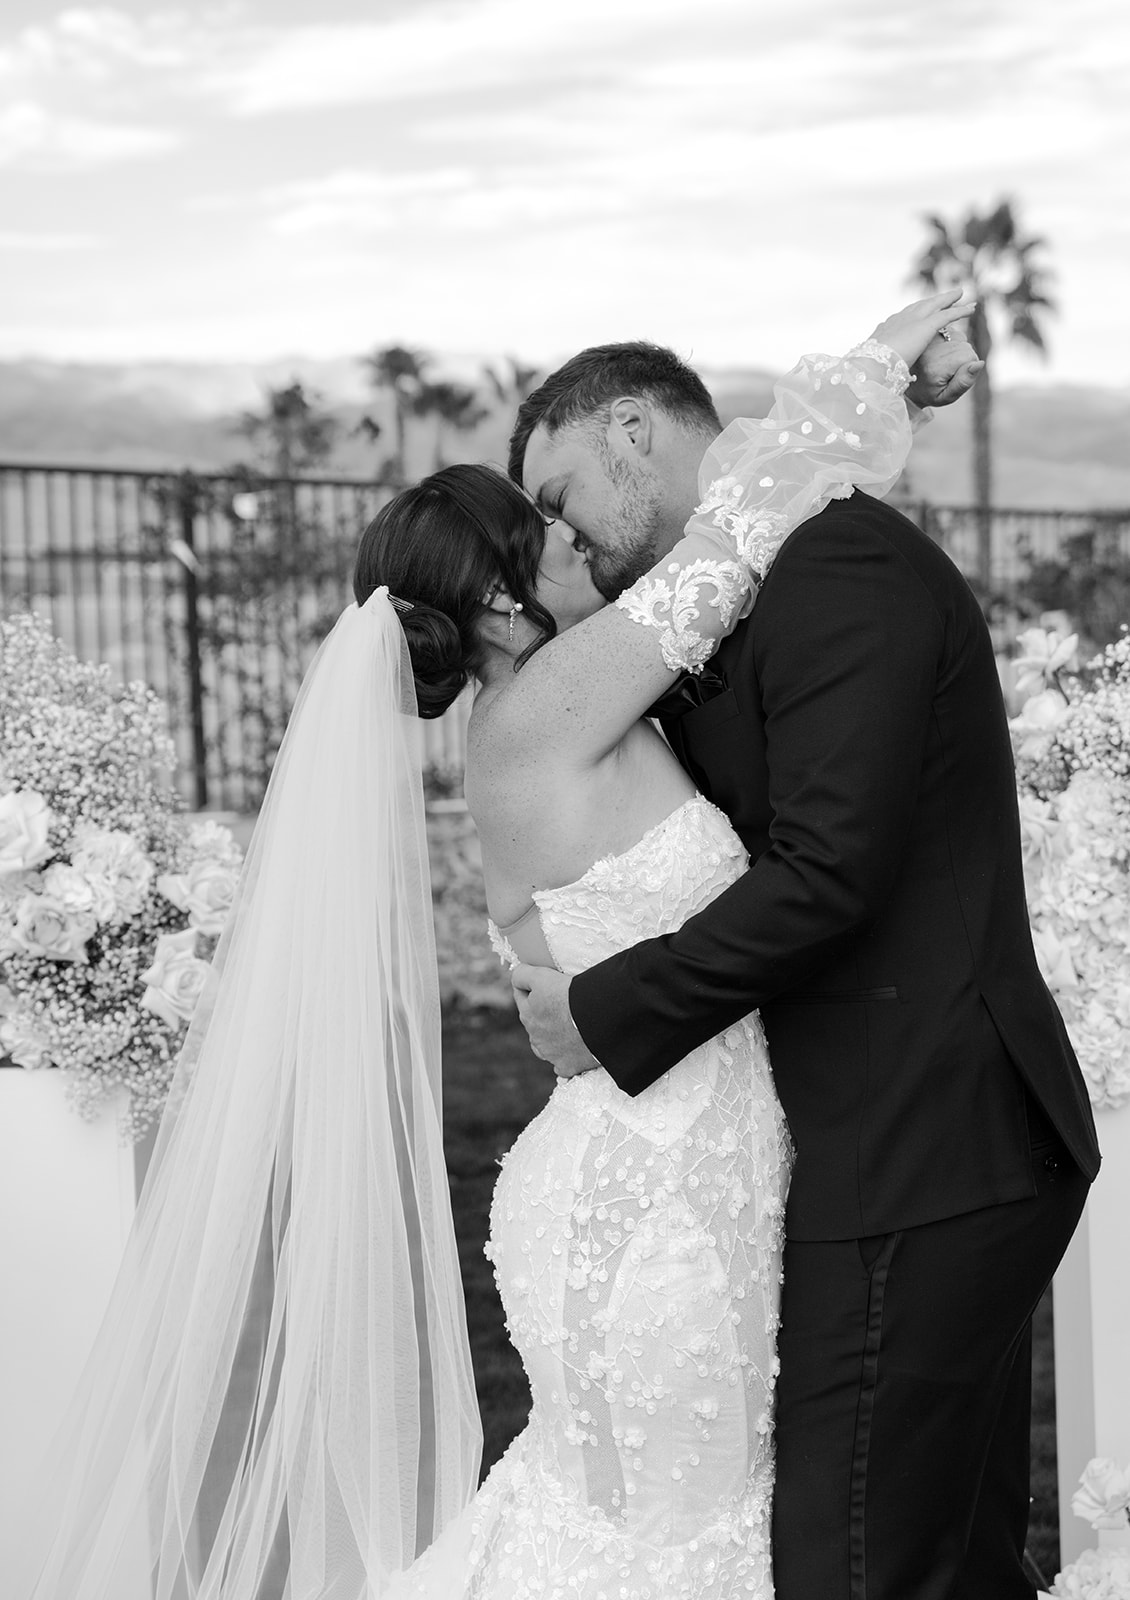 A newlywed couple shares their first kiss at their wedding in the desert